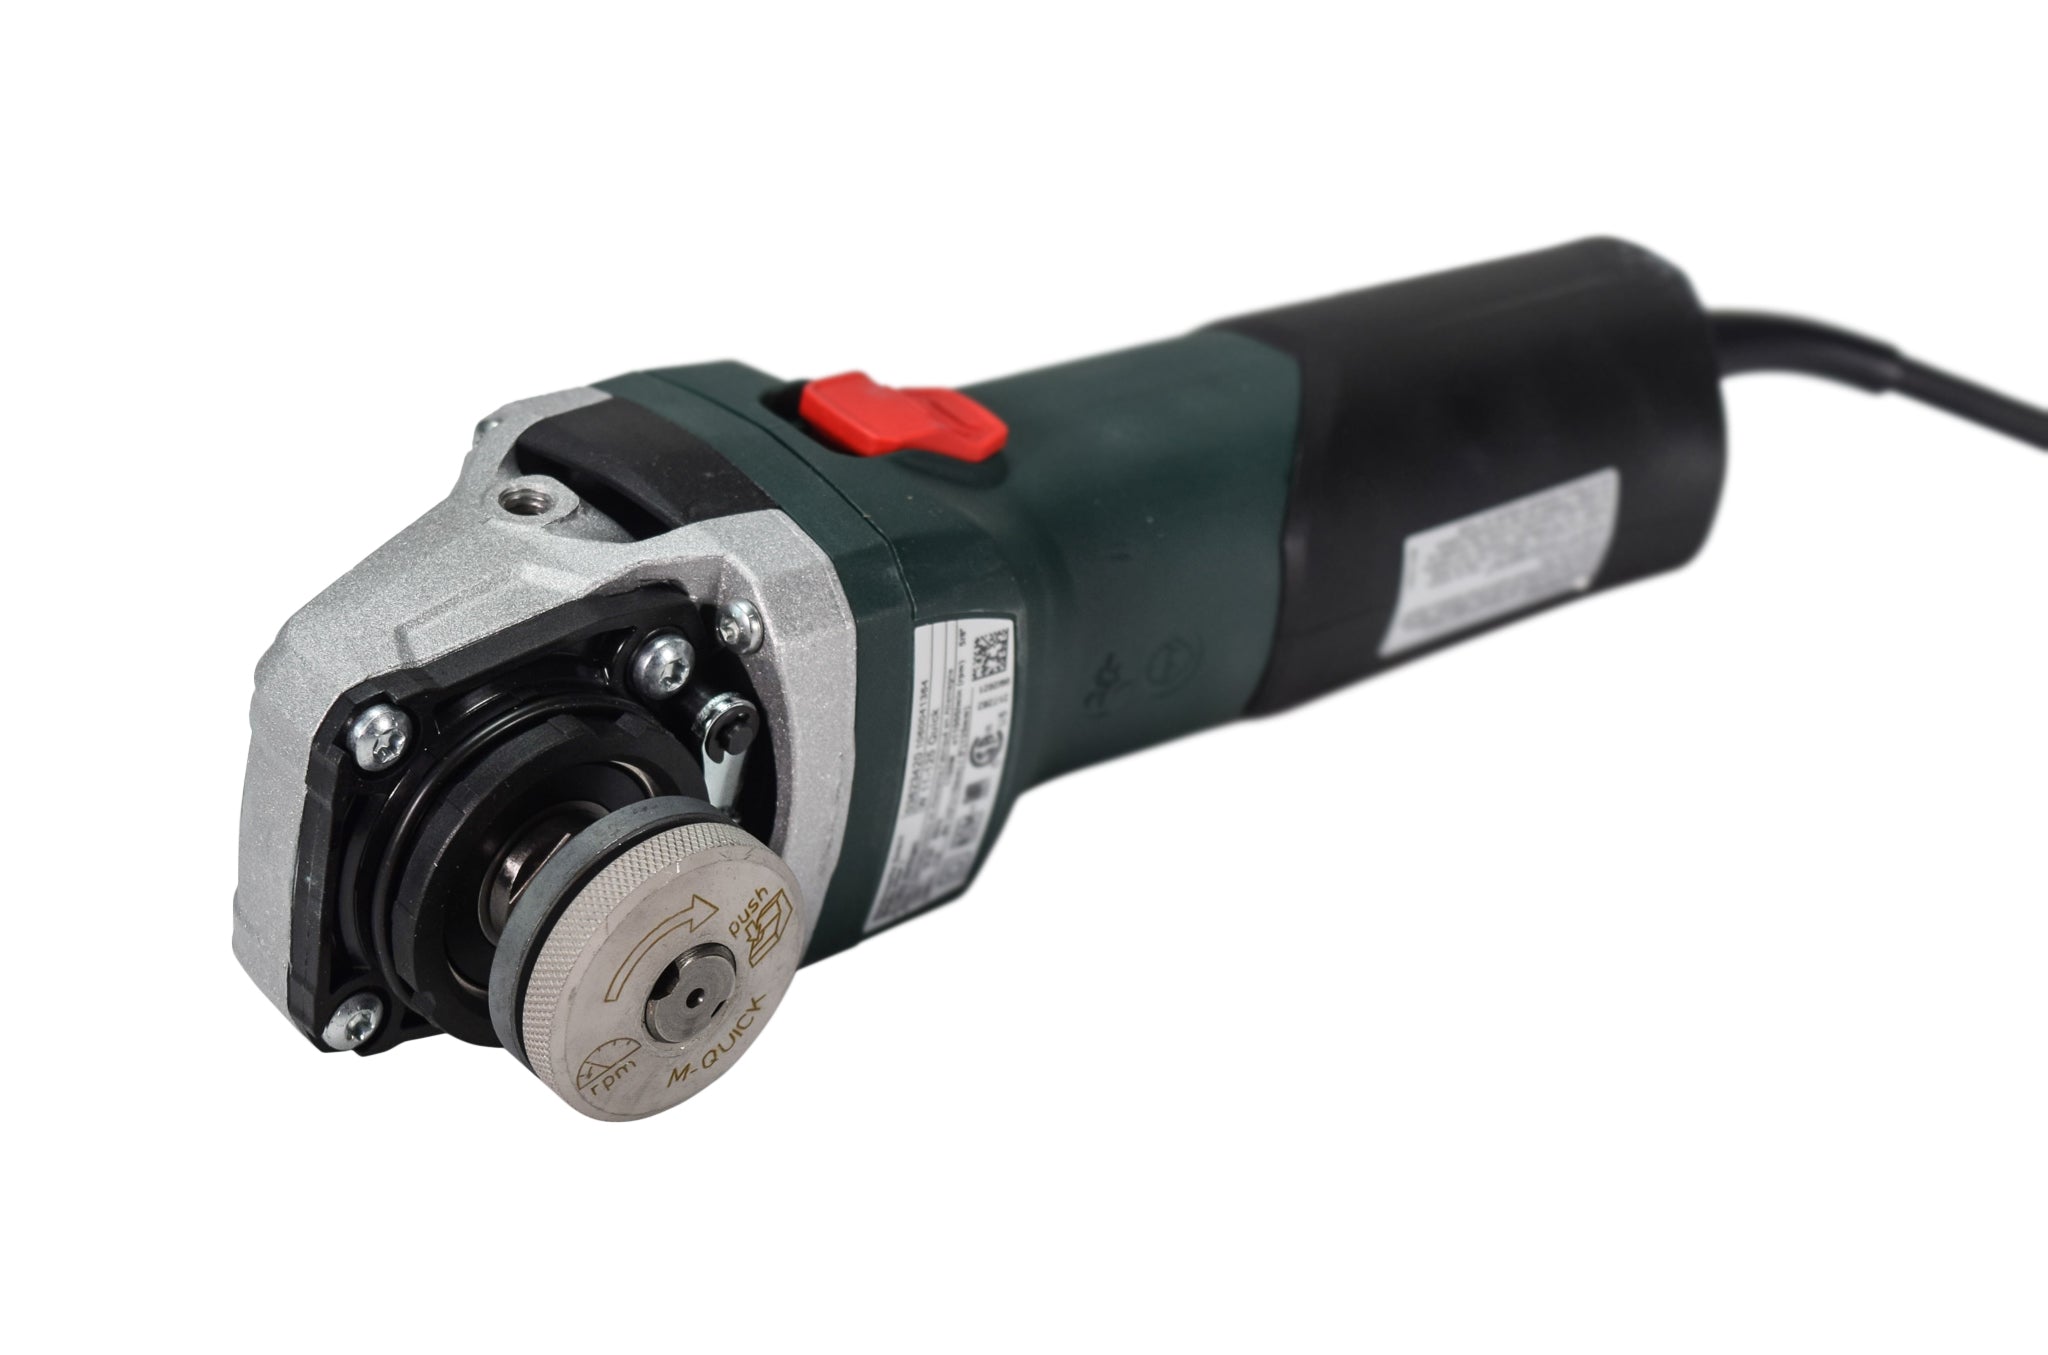 Metabo-603623420-4.5-inch-5-inch-Angle-Grinder-11-000-Rpm-11.0-Amps-with-Lock-on-image-7